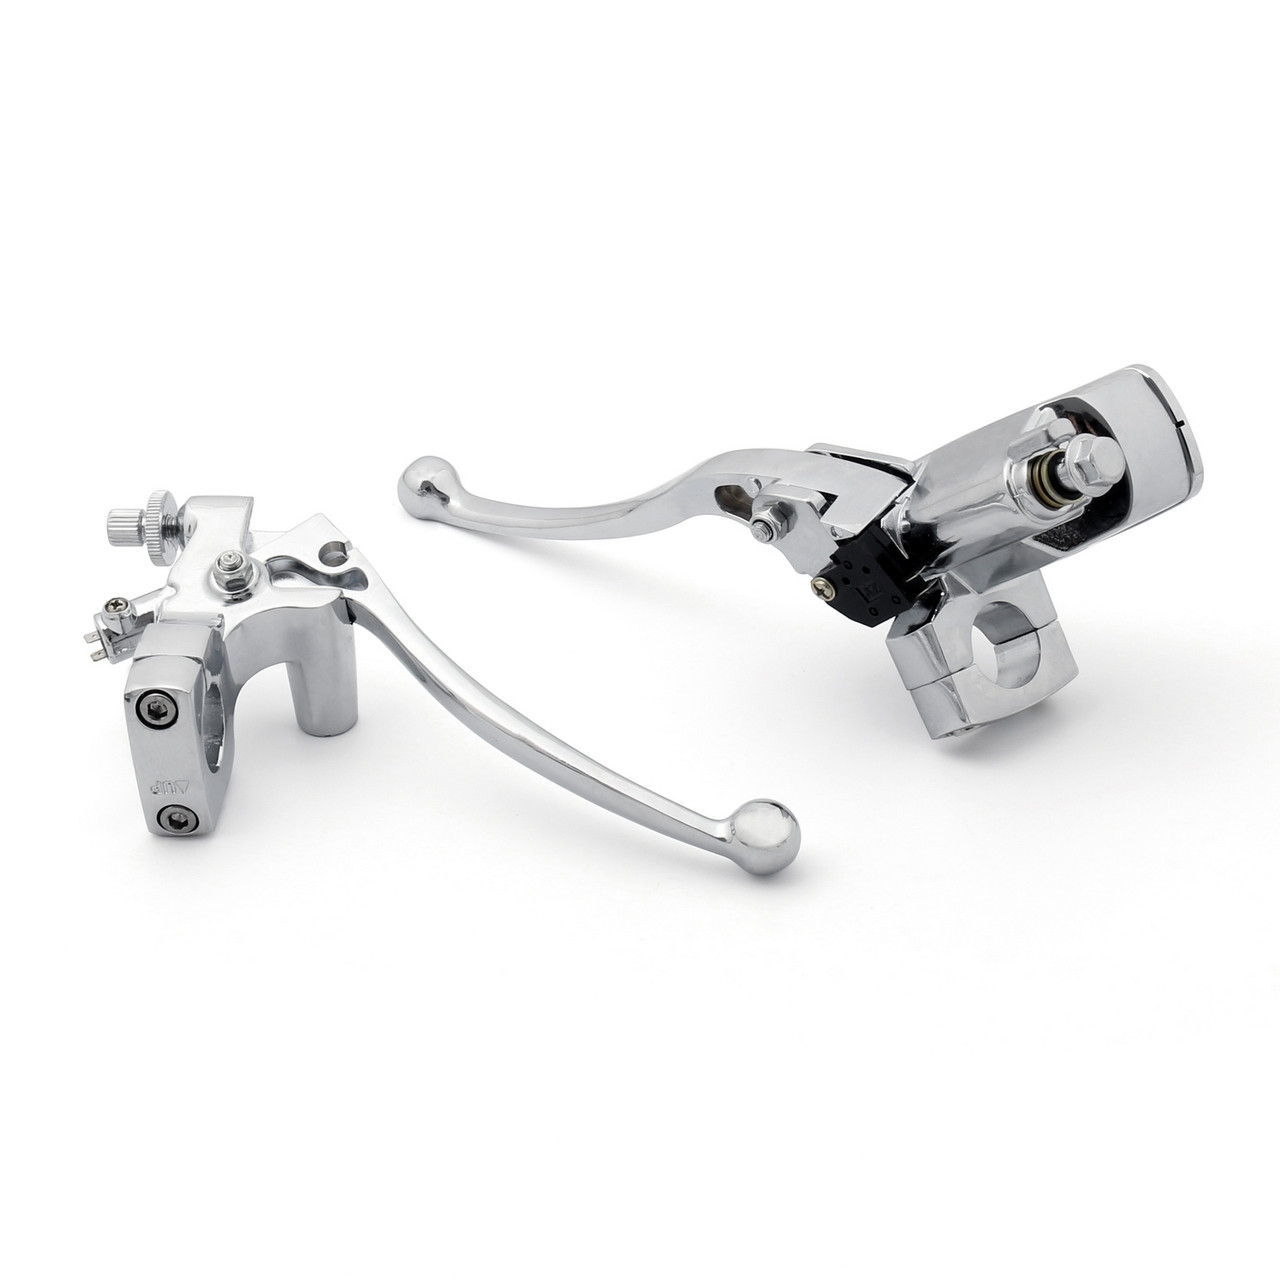 Yamaha Virago V Star Road Star Levers Hydraulic Brake Cable Clutch Flame Master Cylinder Cover 1" Chrome